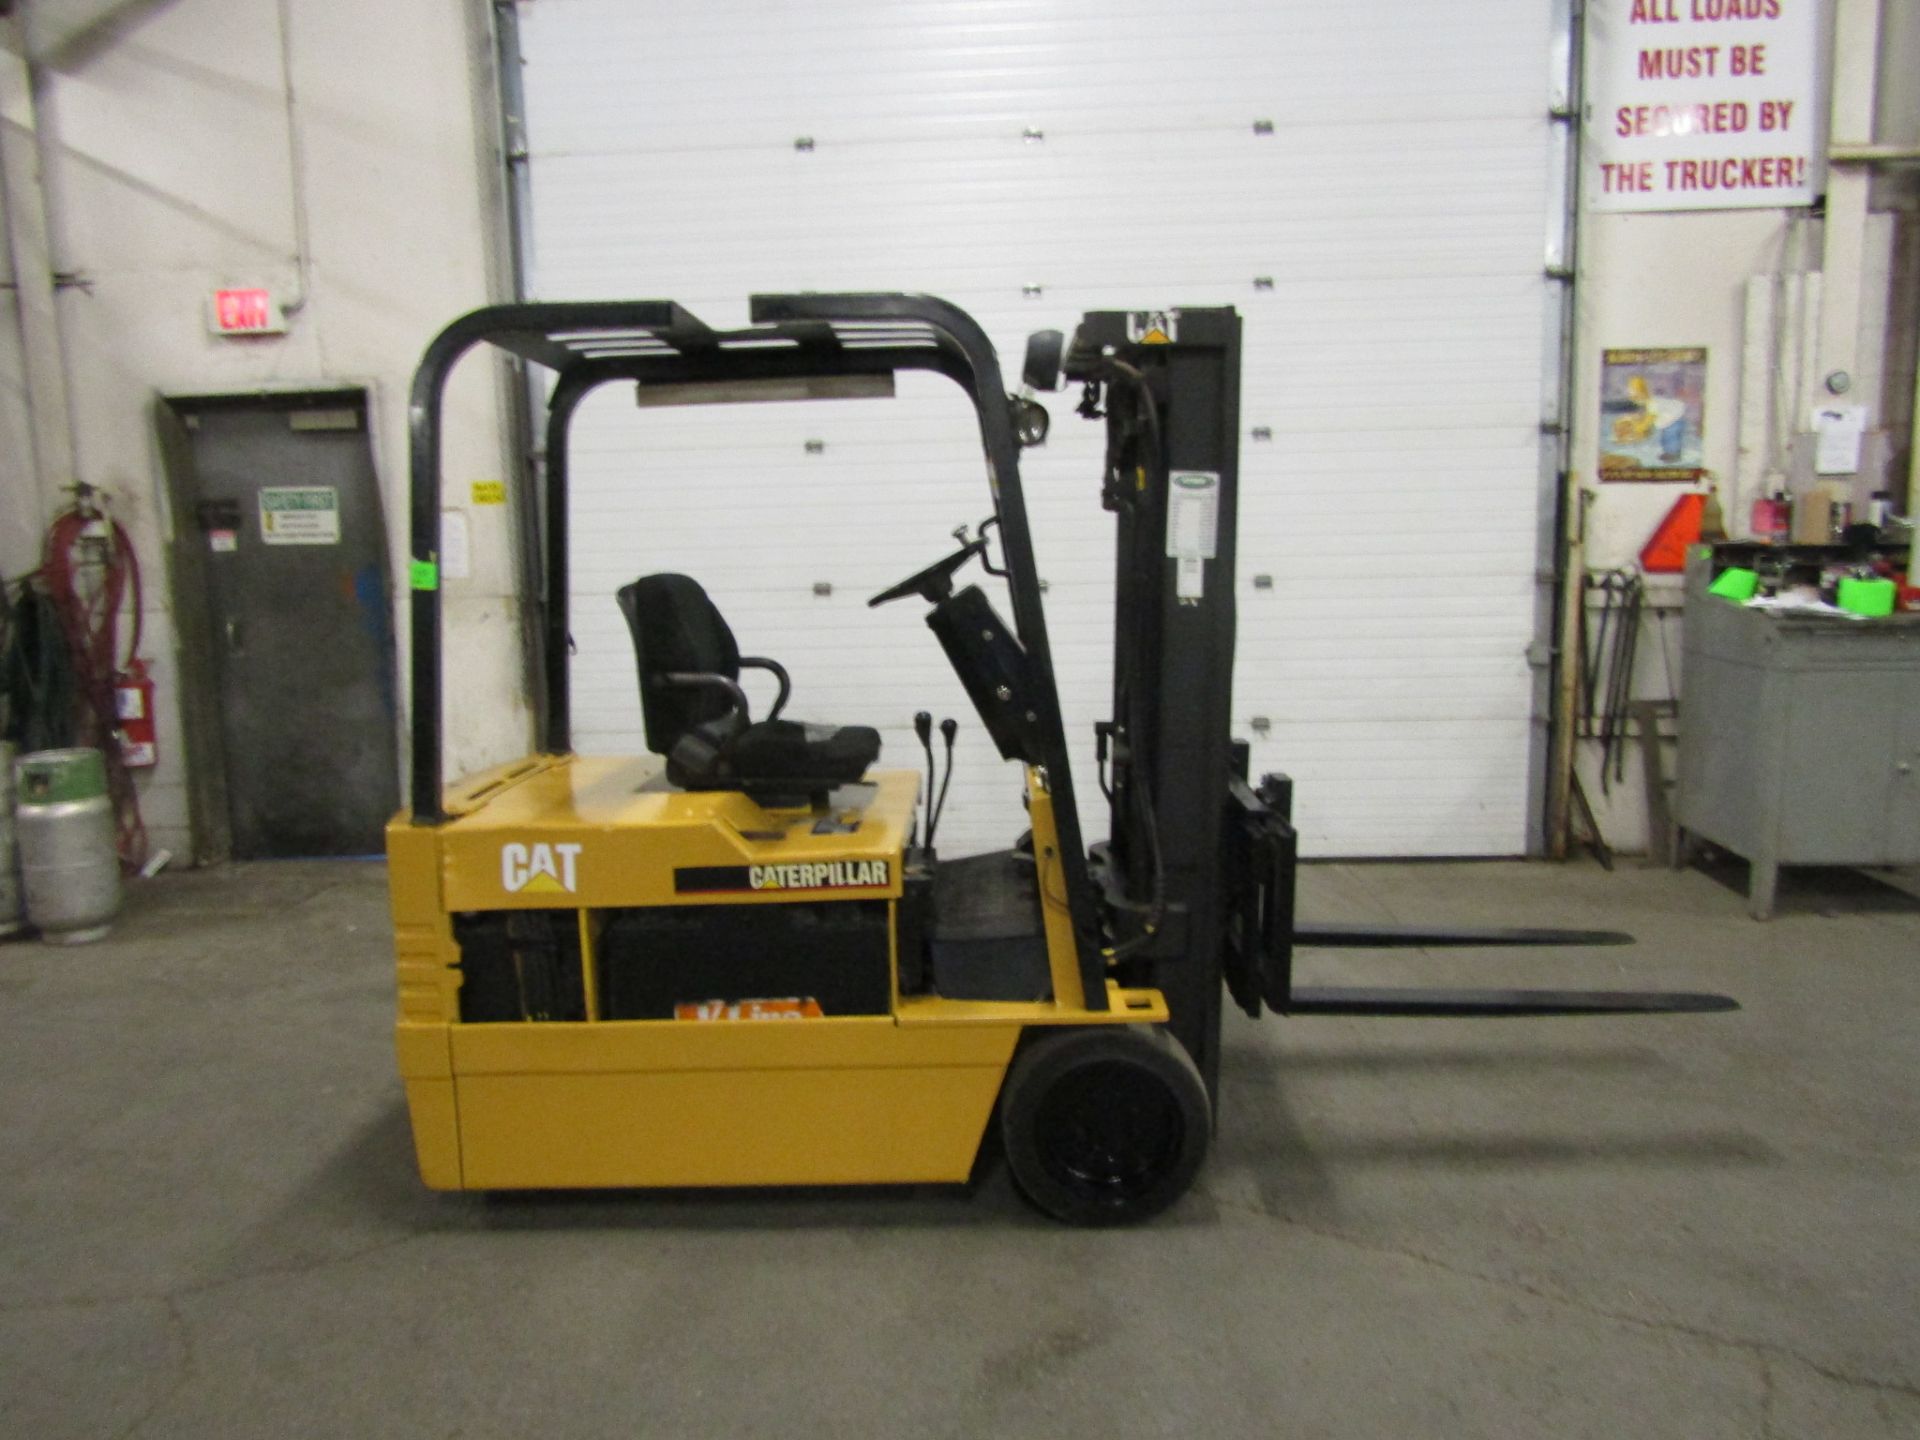 CAT 4000lbs Capacity 3-wheel Electric Forklift with sideshift and 3-stage mast